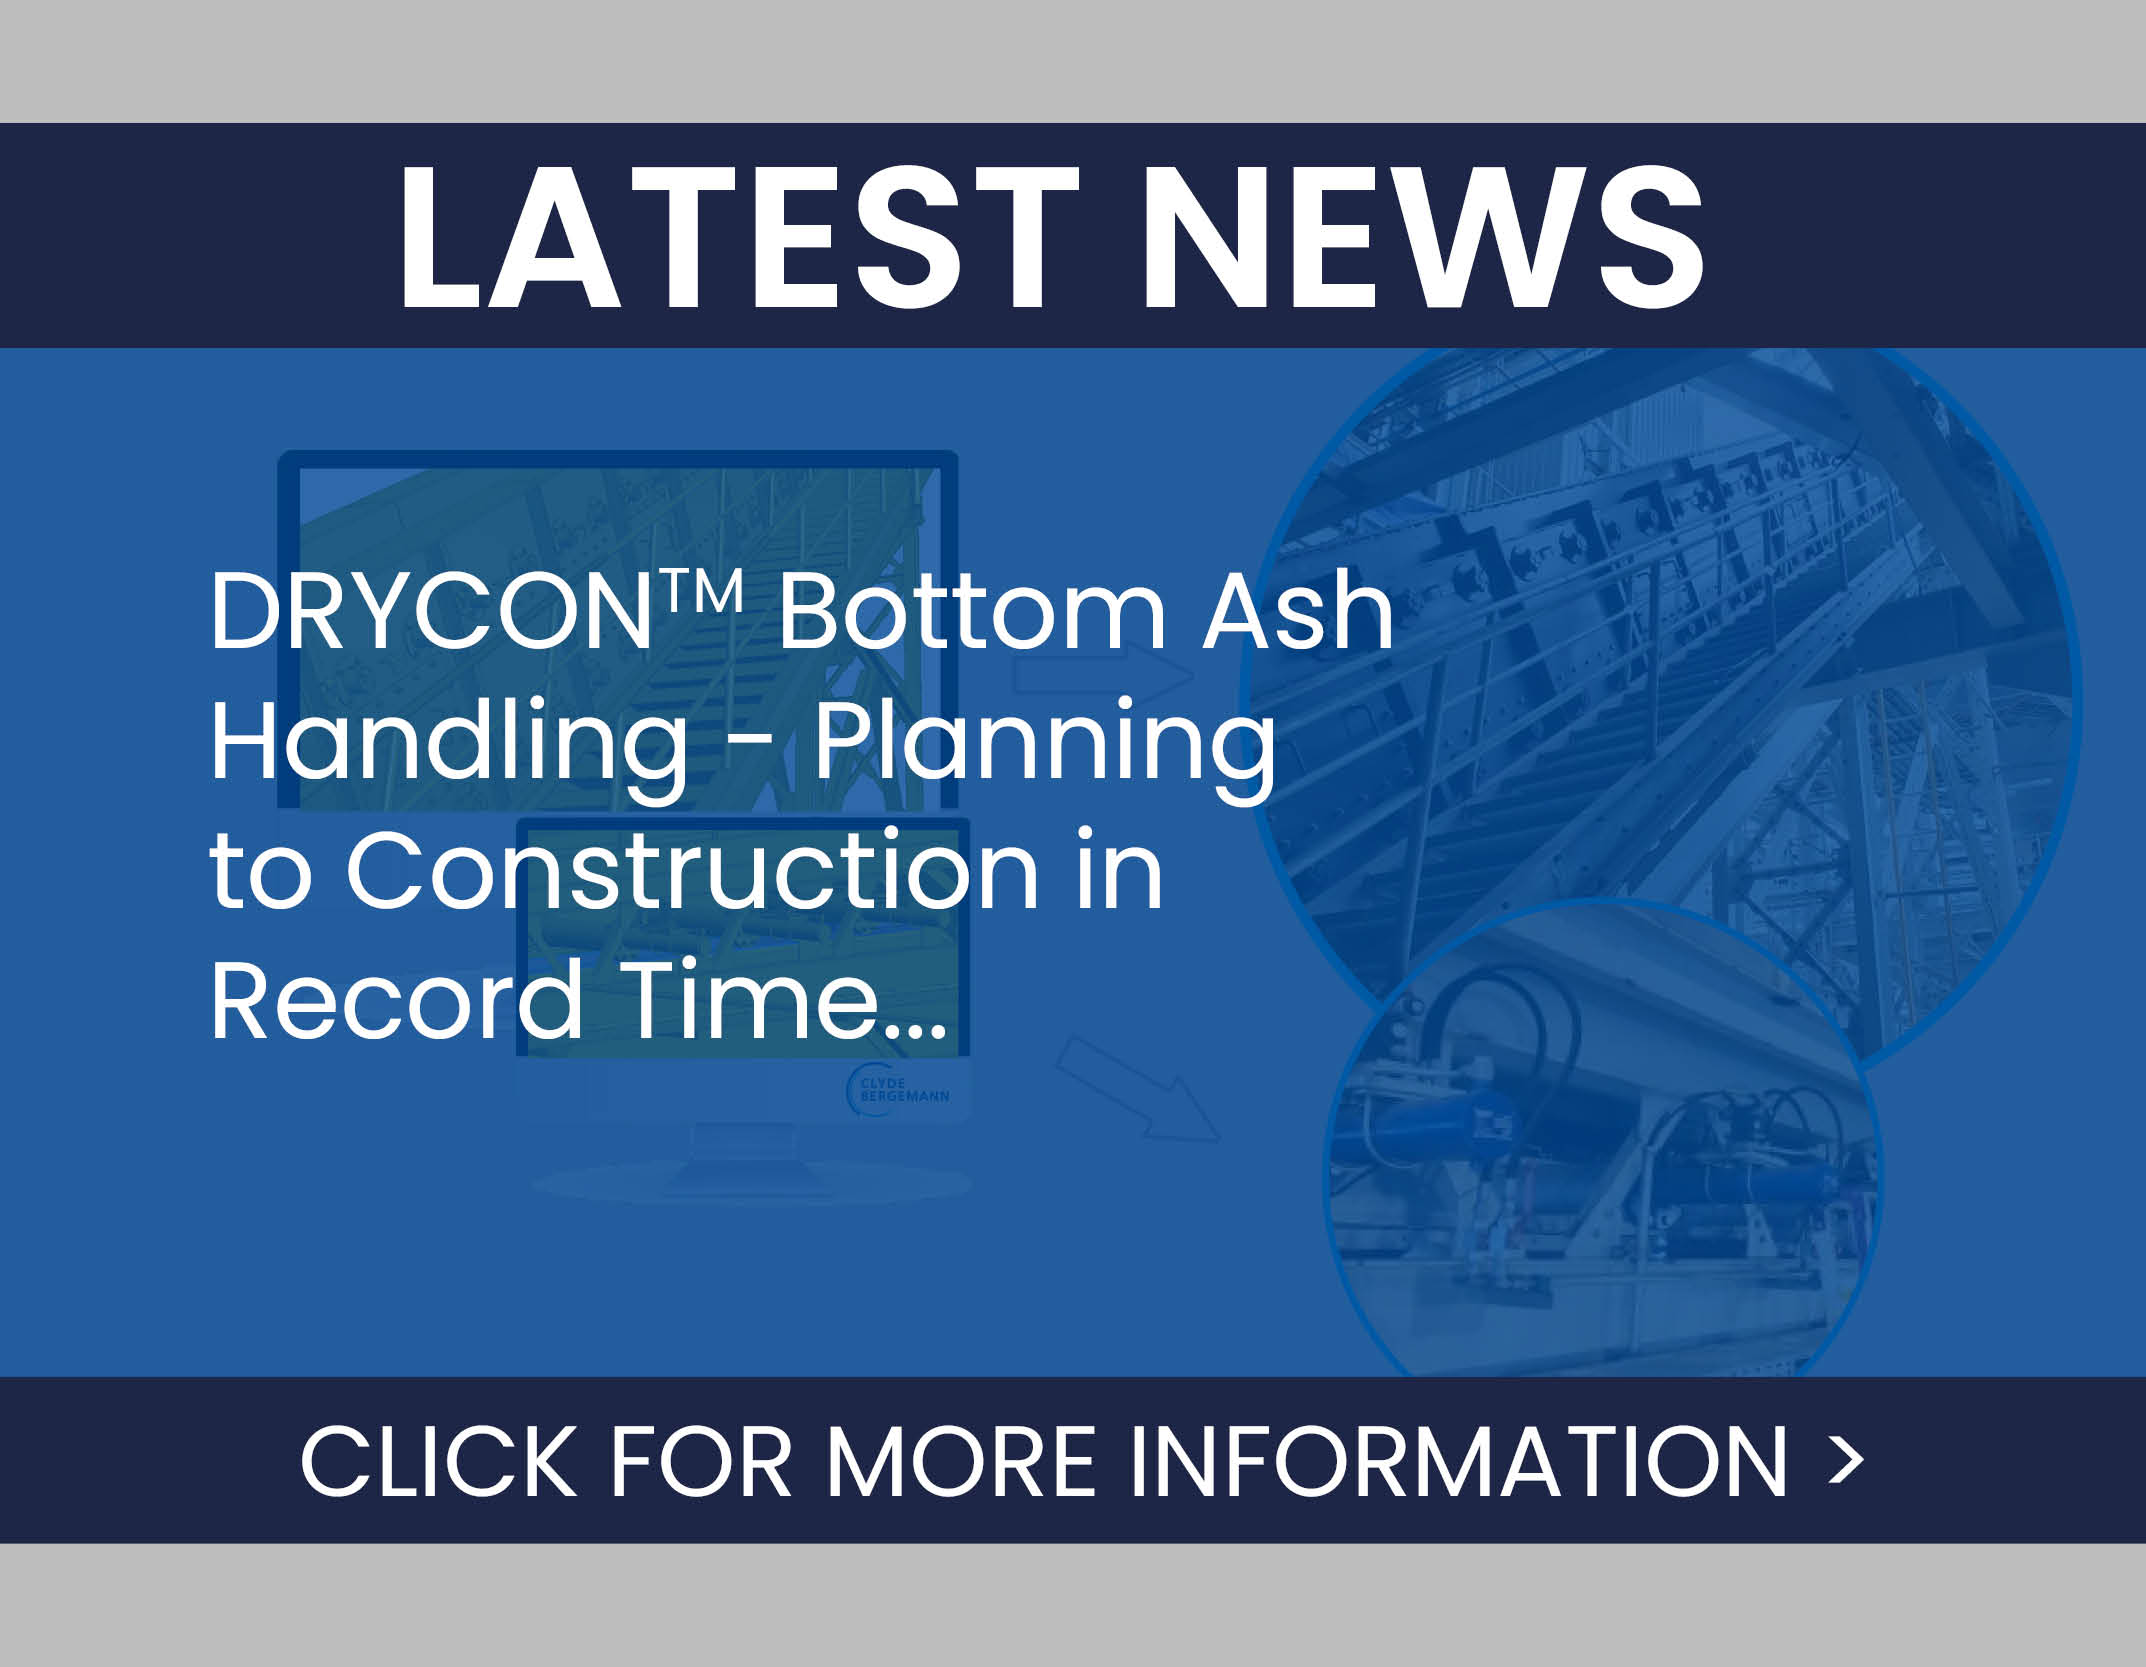 DRYCON - planning to construction in record time